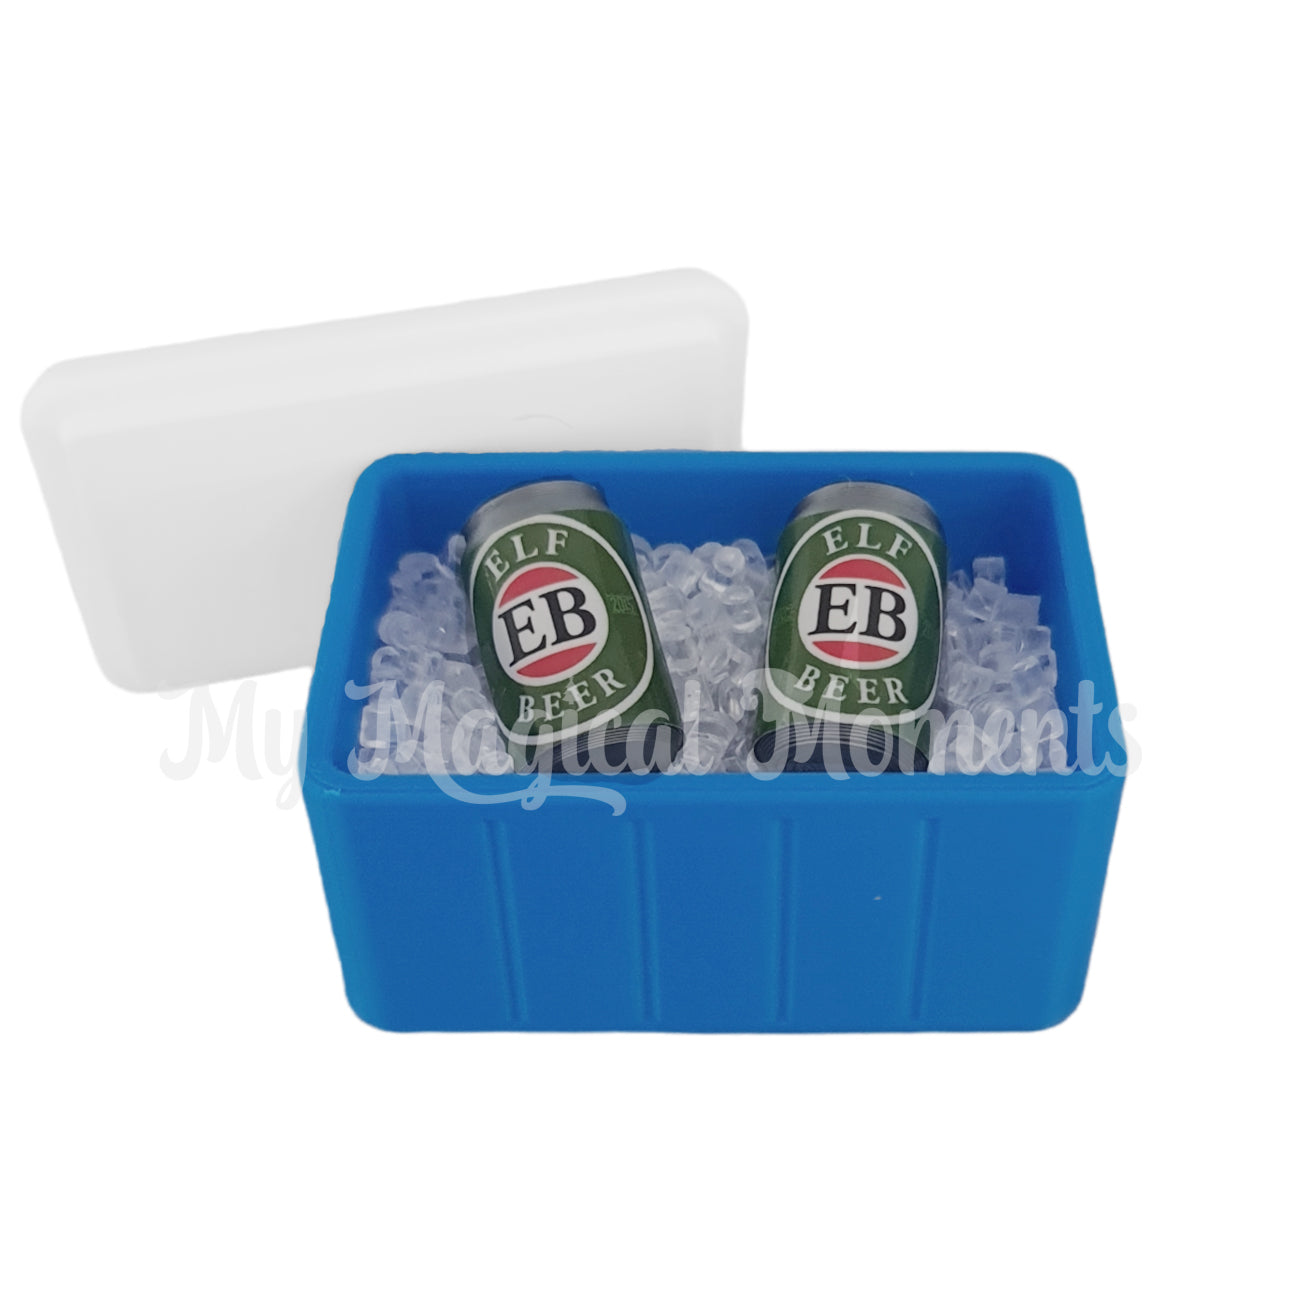 elf Esky full of ice with miniature beer